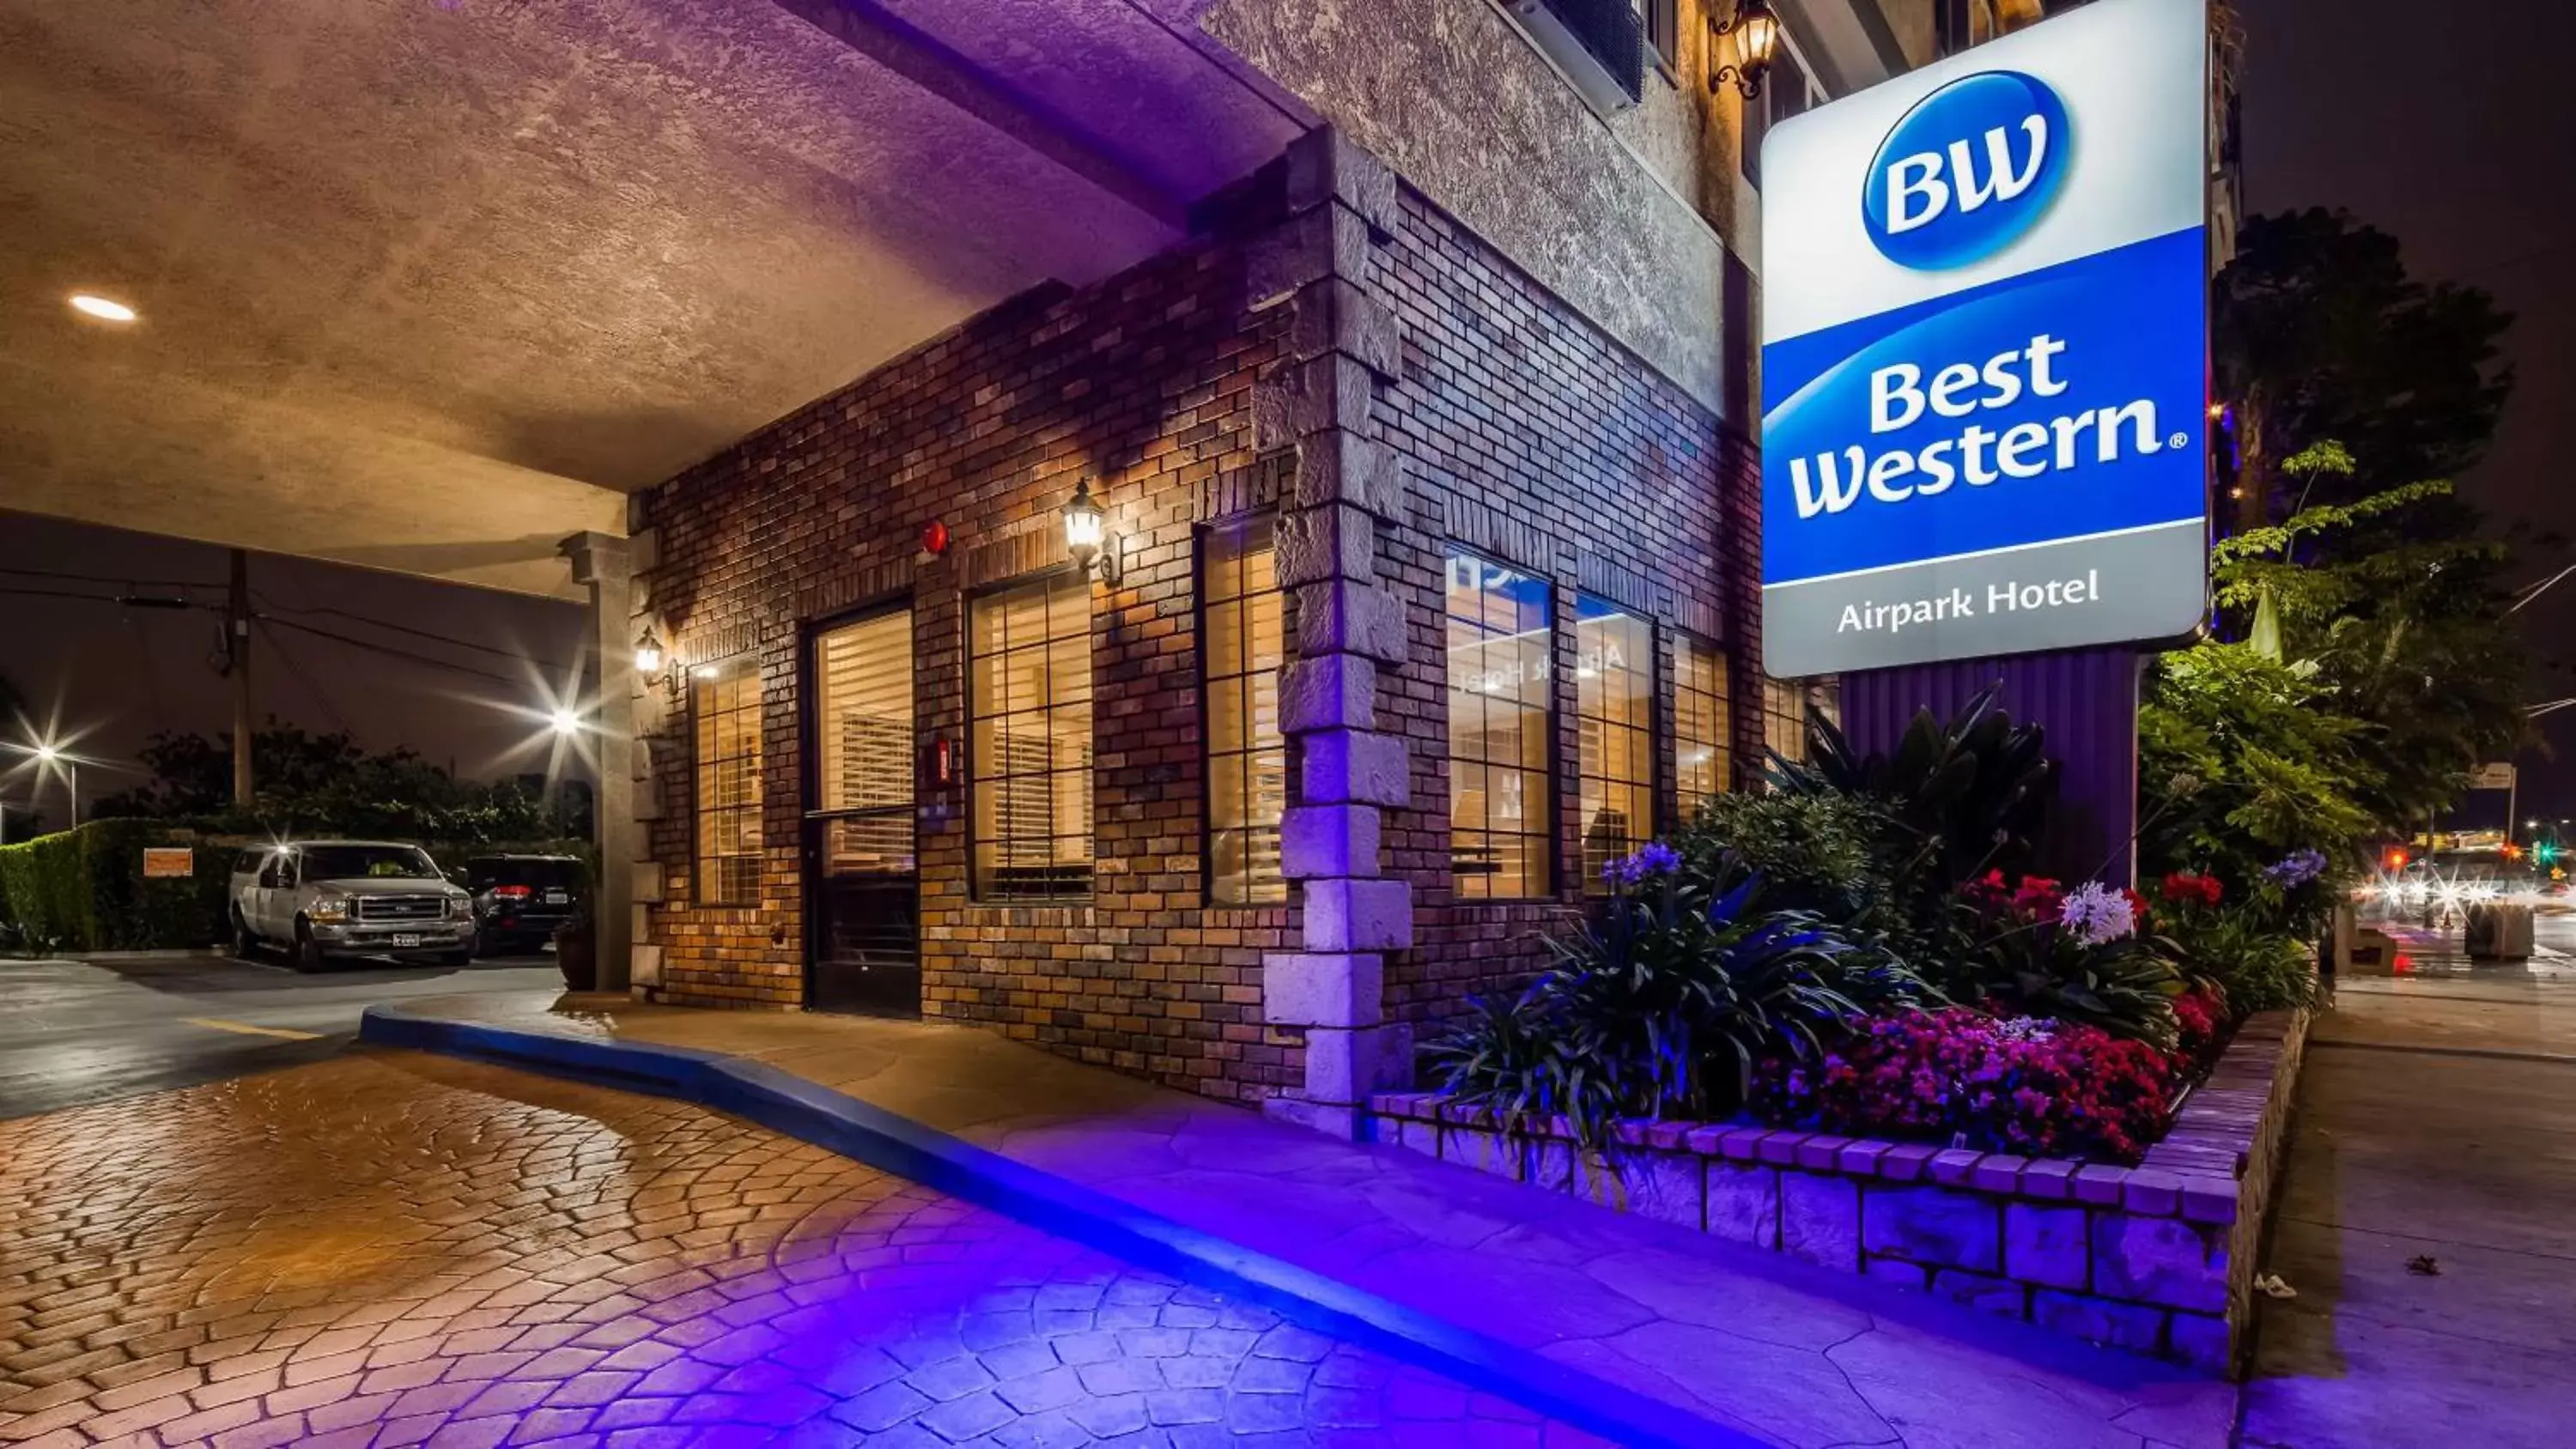 Property building, Swimming Pool in Best Western Airpark Hotel - Los Angeles LAX Airport